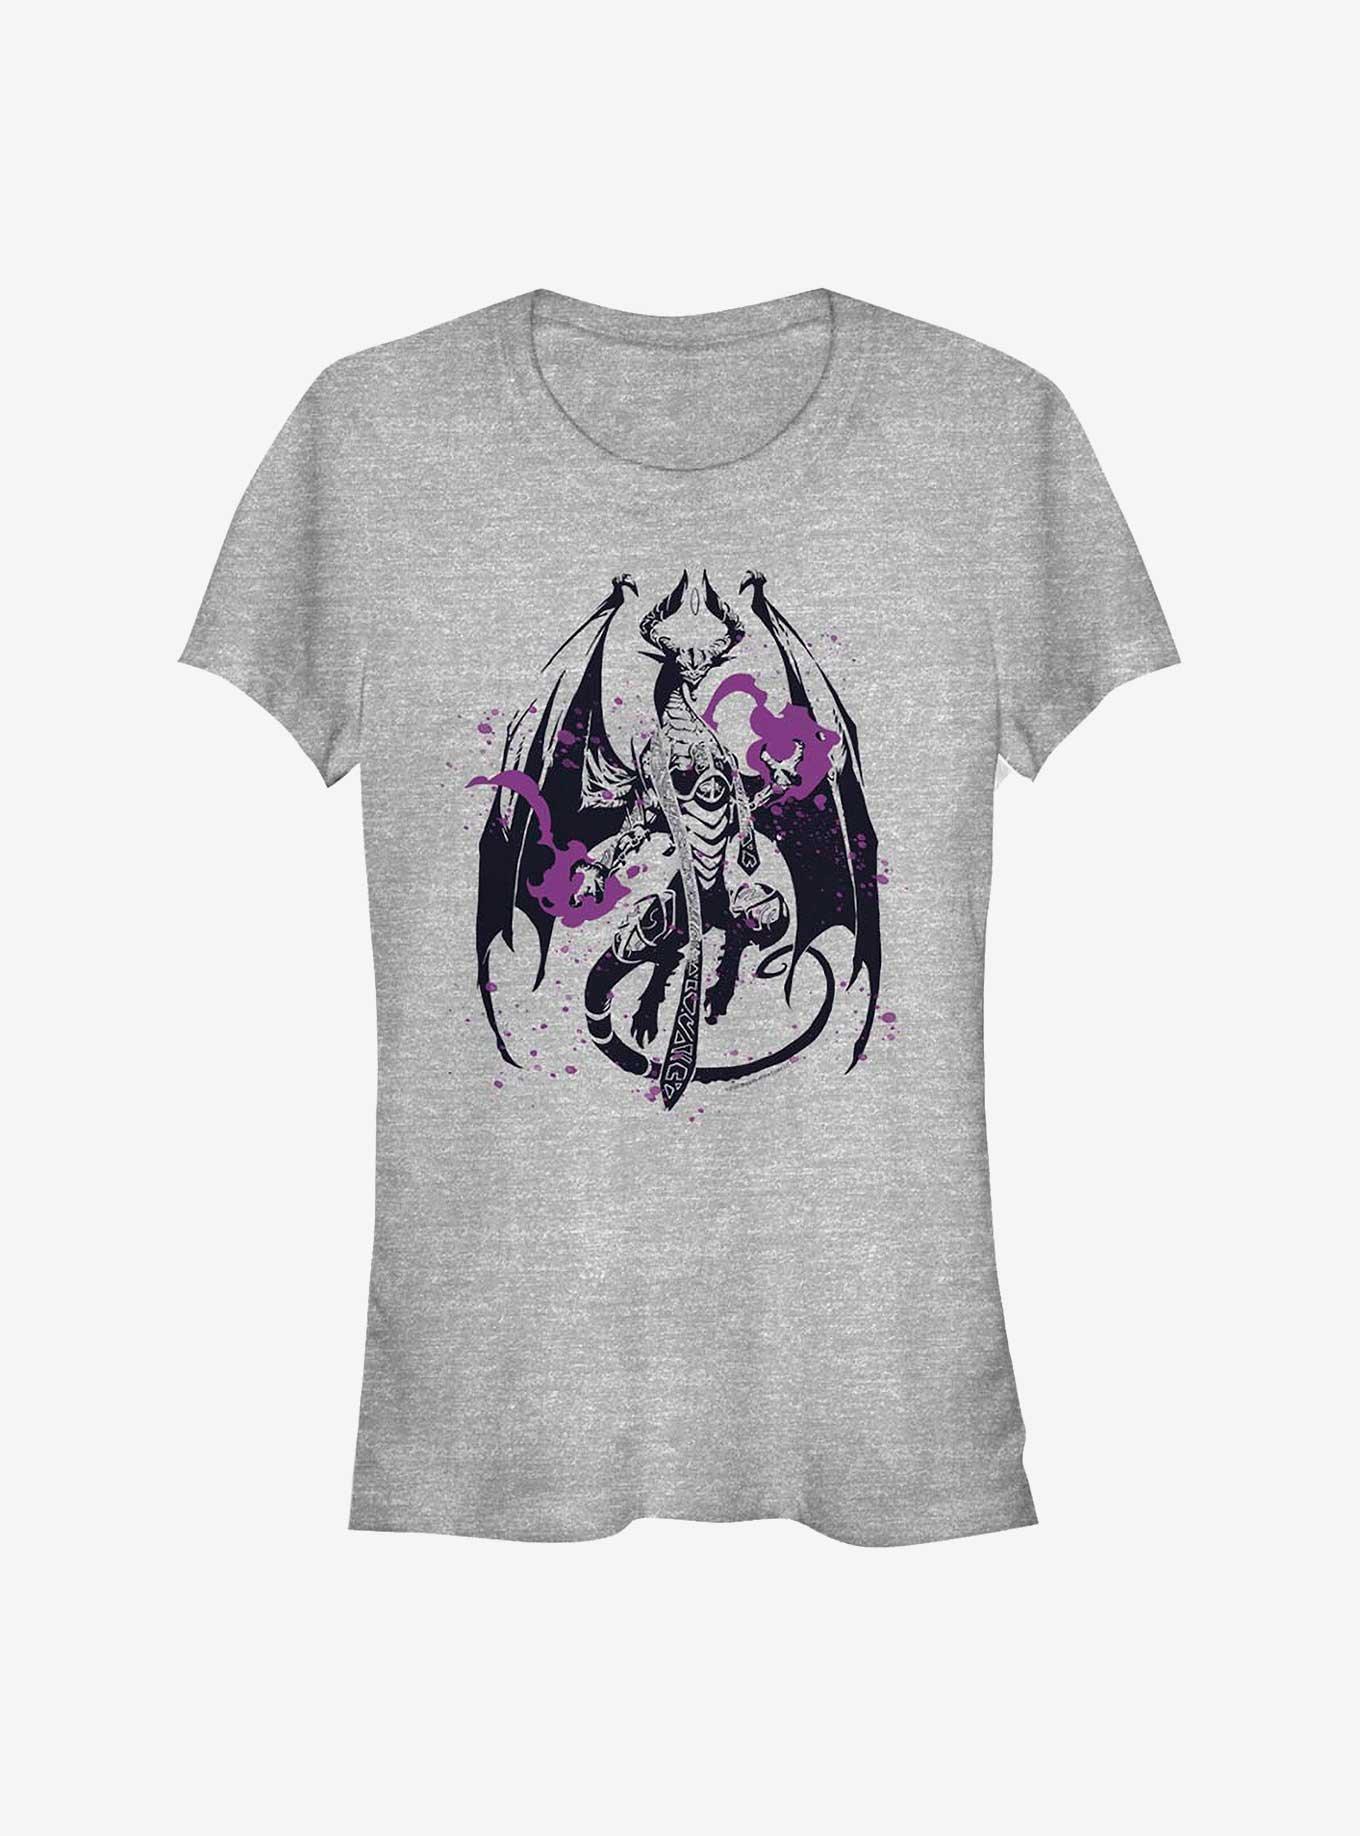 Magic The Gathering Nicol Bolas In Action Girls T-Shirt, ATH HTR, hi-res